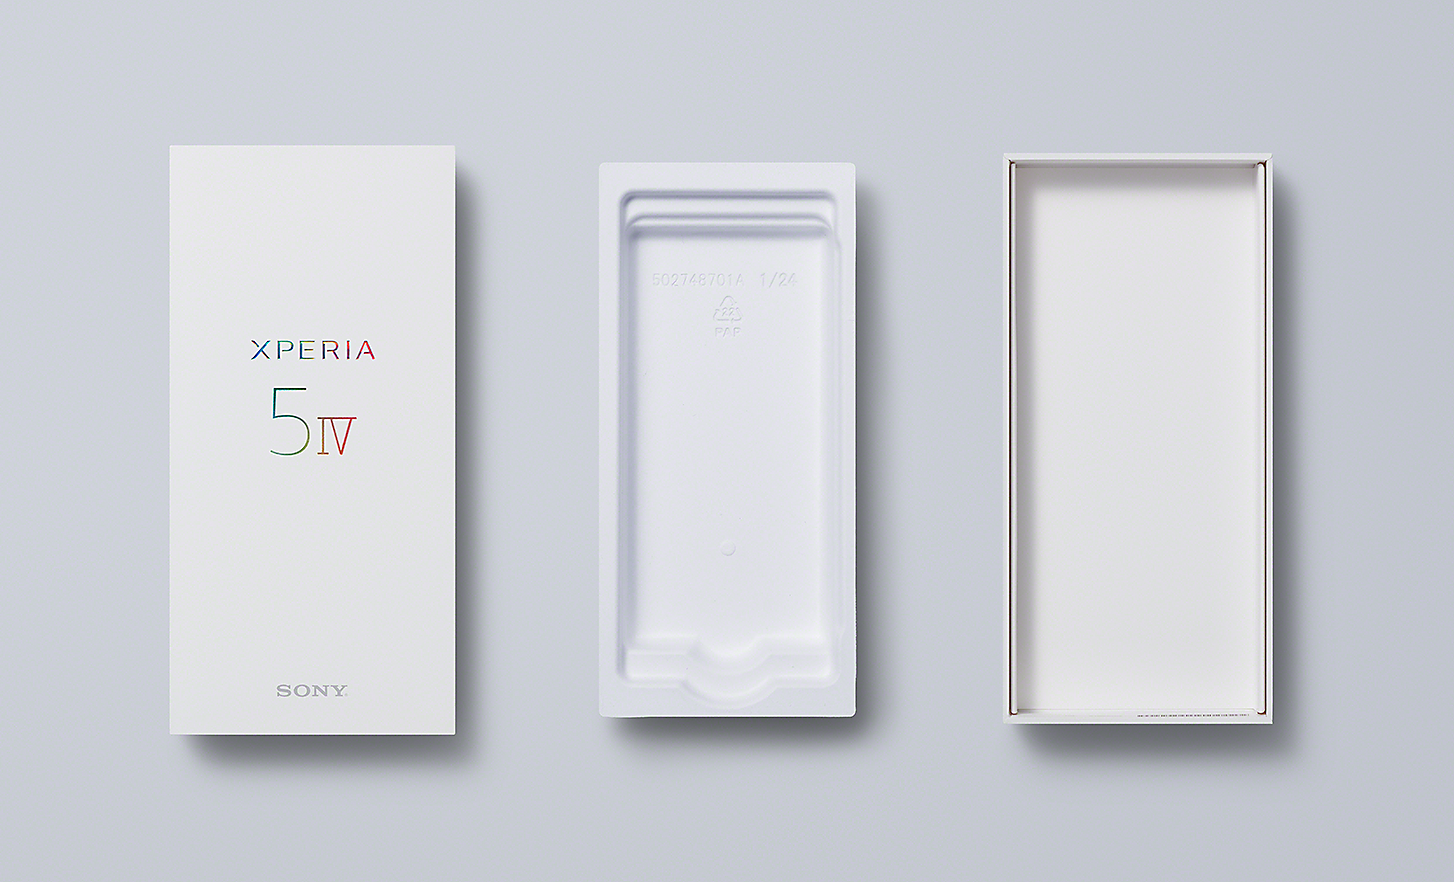 Packaging components for the Xperia 5 IV